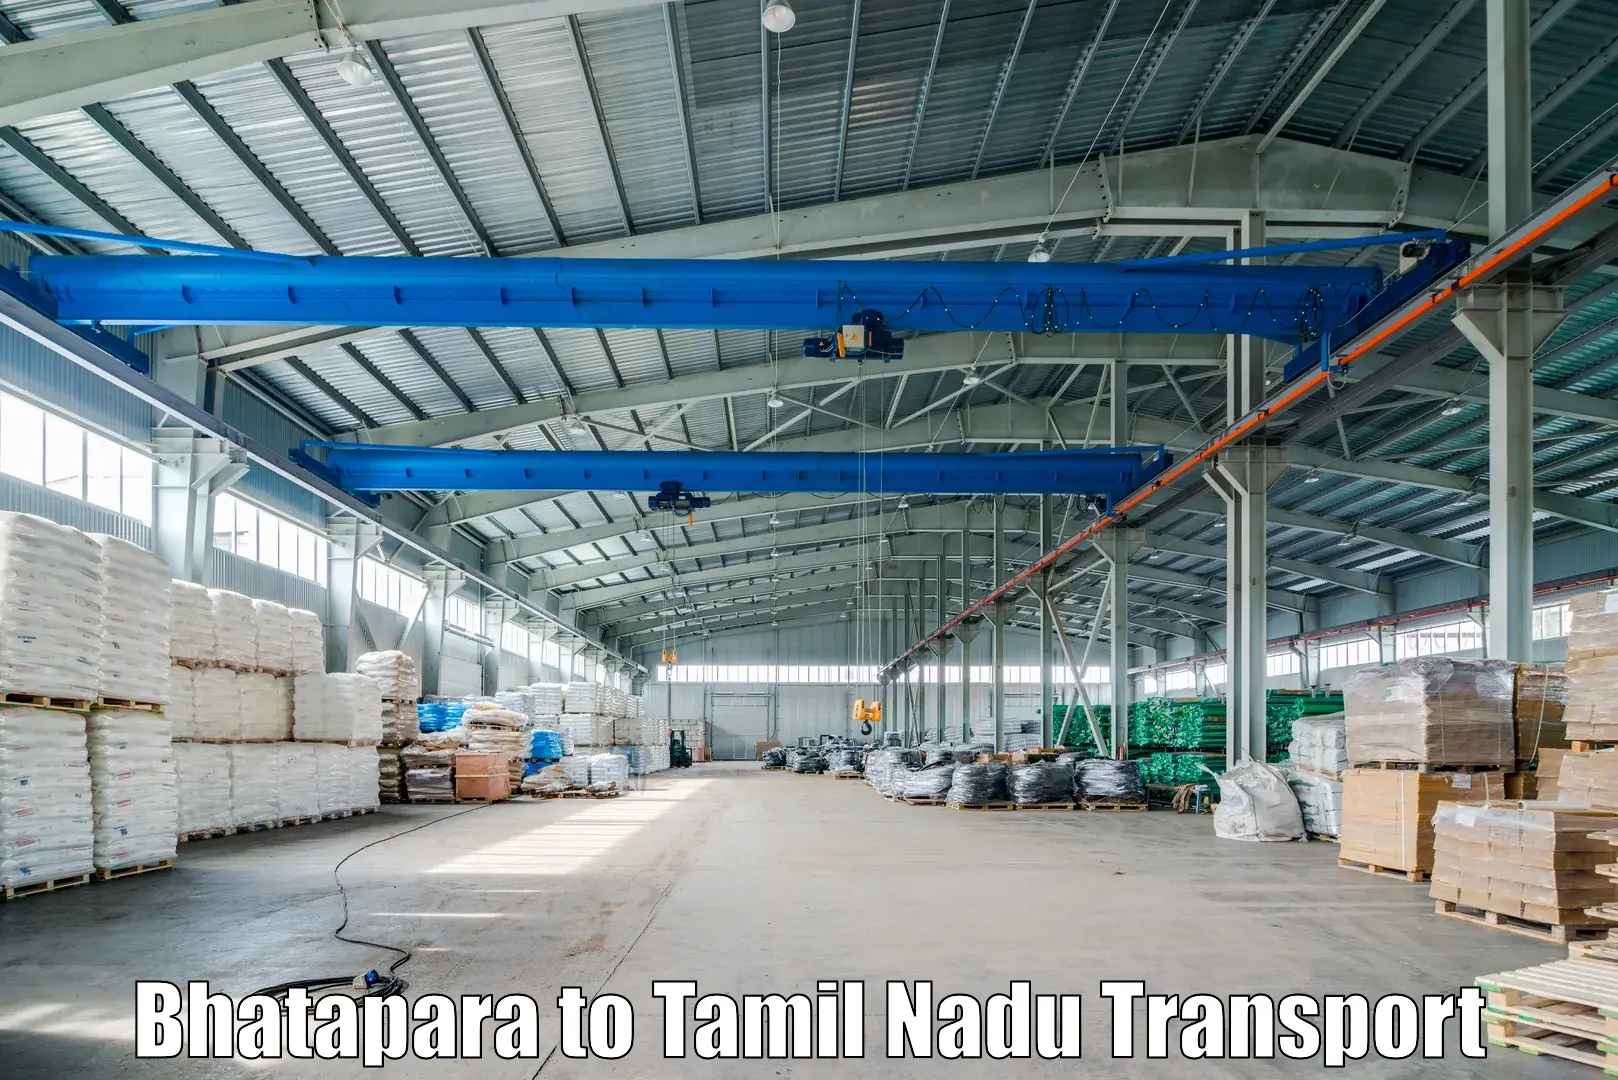 Transport bike from one state to another Bhatapara to Tuticorin Port